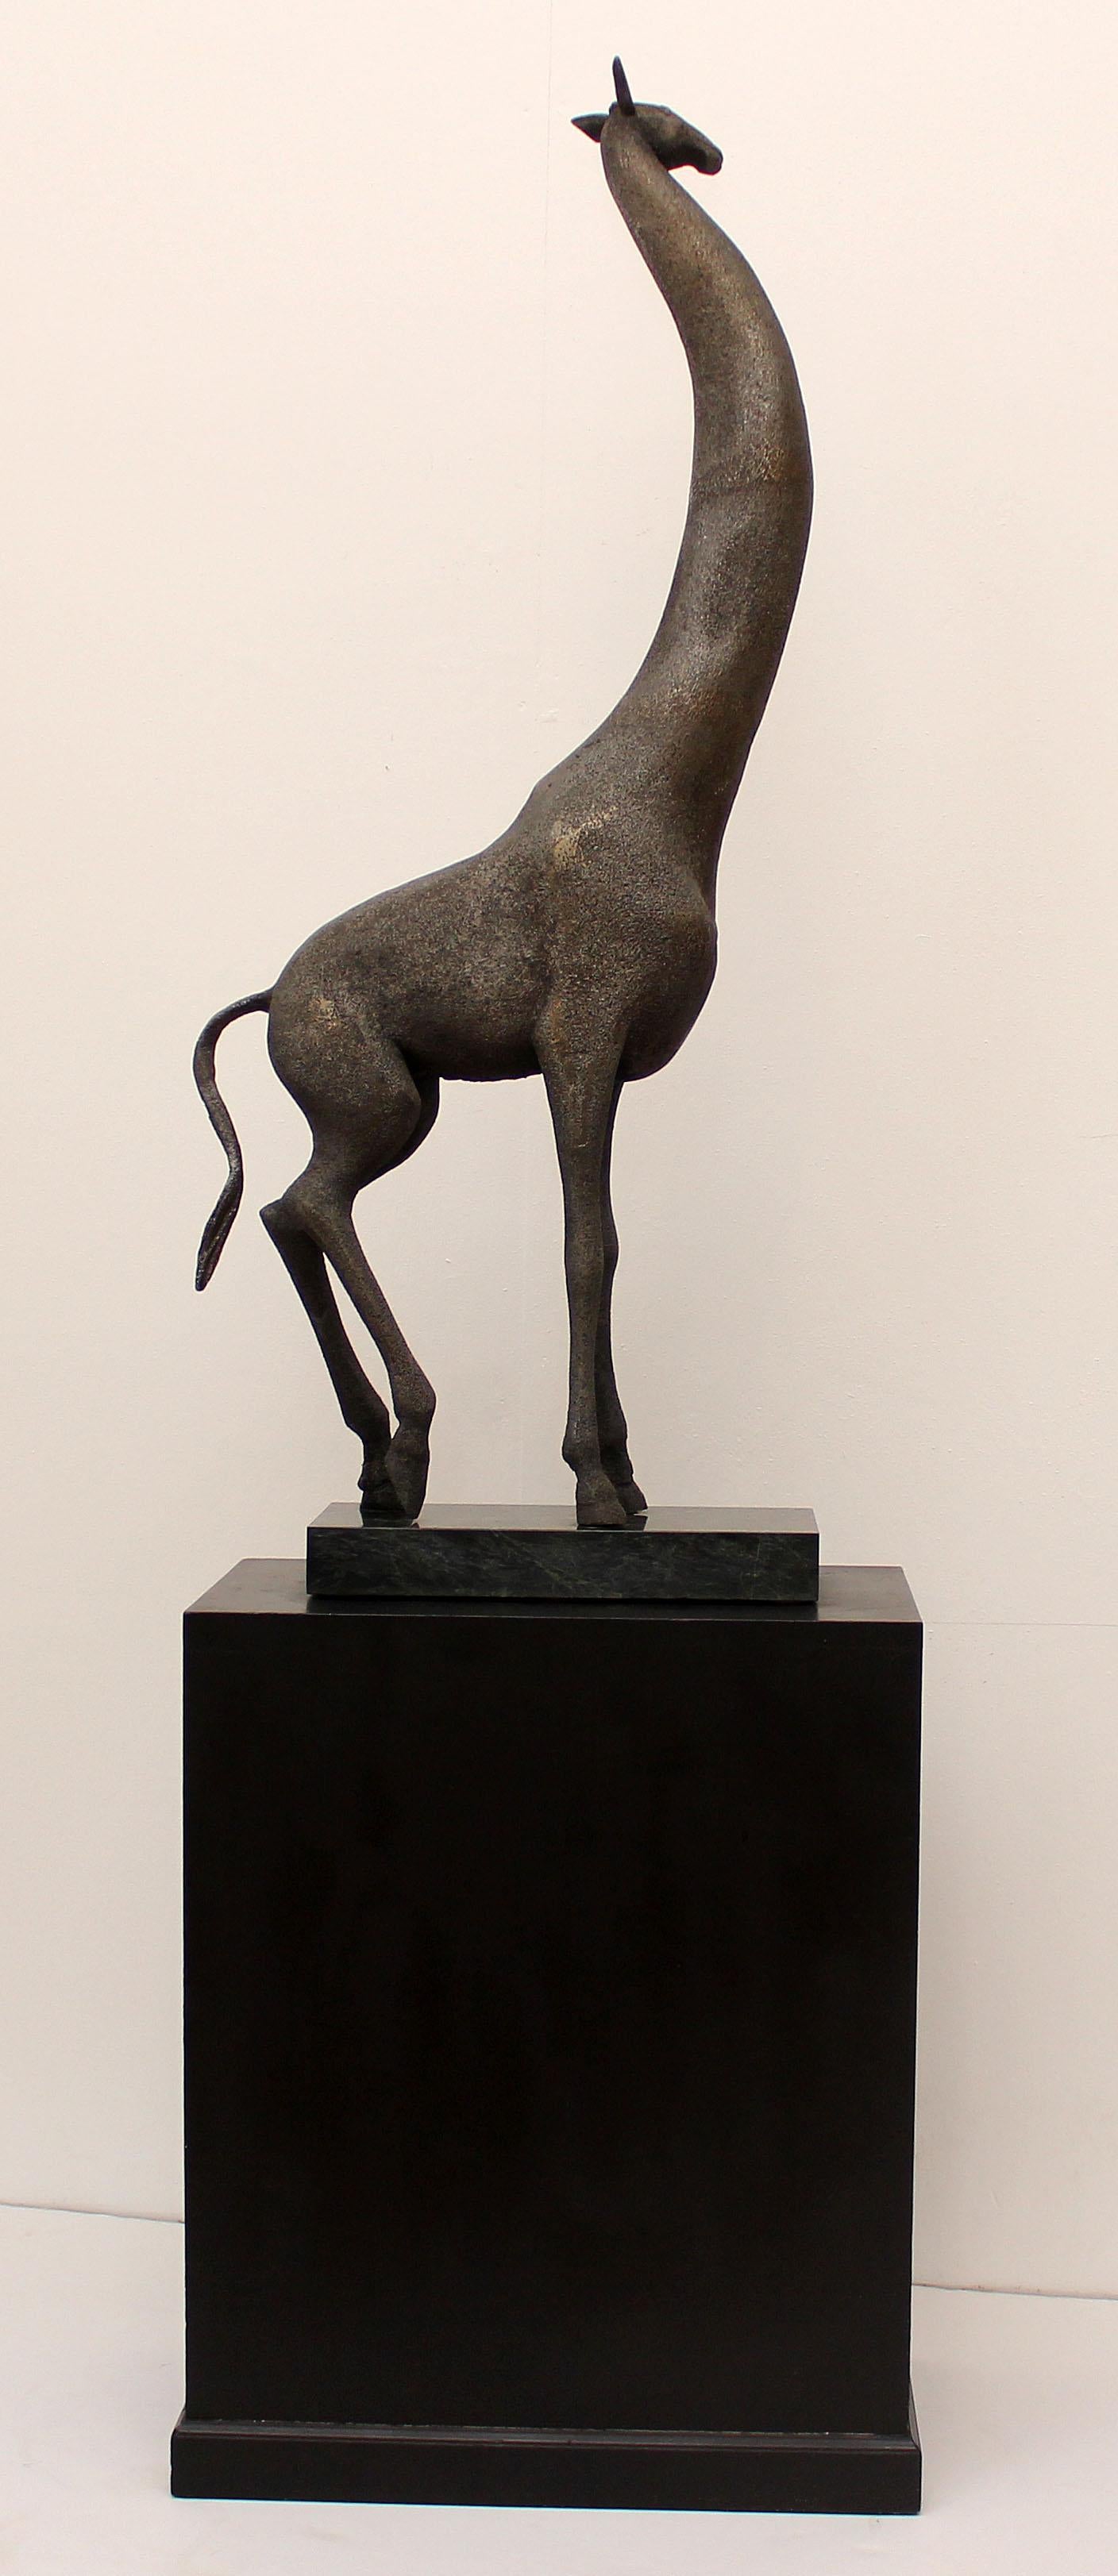 A large and early sand cast aluminum modernist sculpture of a giraffe by Cuban American artist Manuel Carbonell. Pedestal included. Measures: Height is 73” with base.
Carbonell’s early sculptures where sand cast and unique. This is an edition of